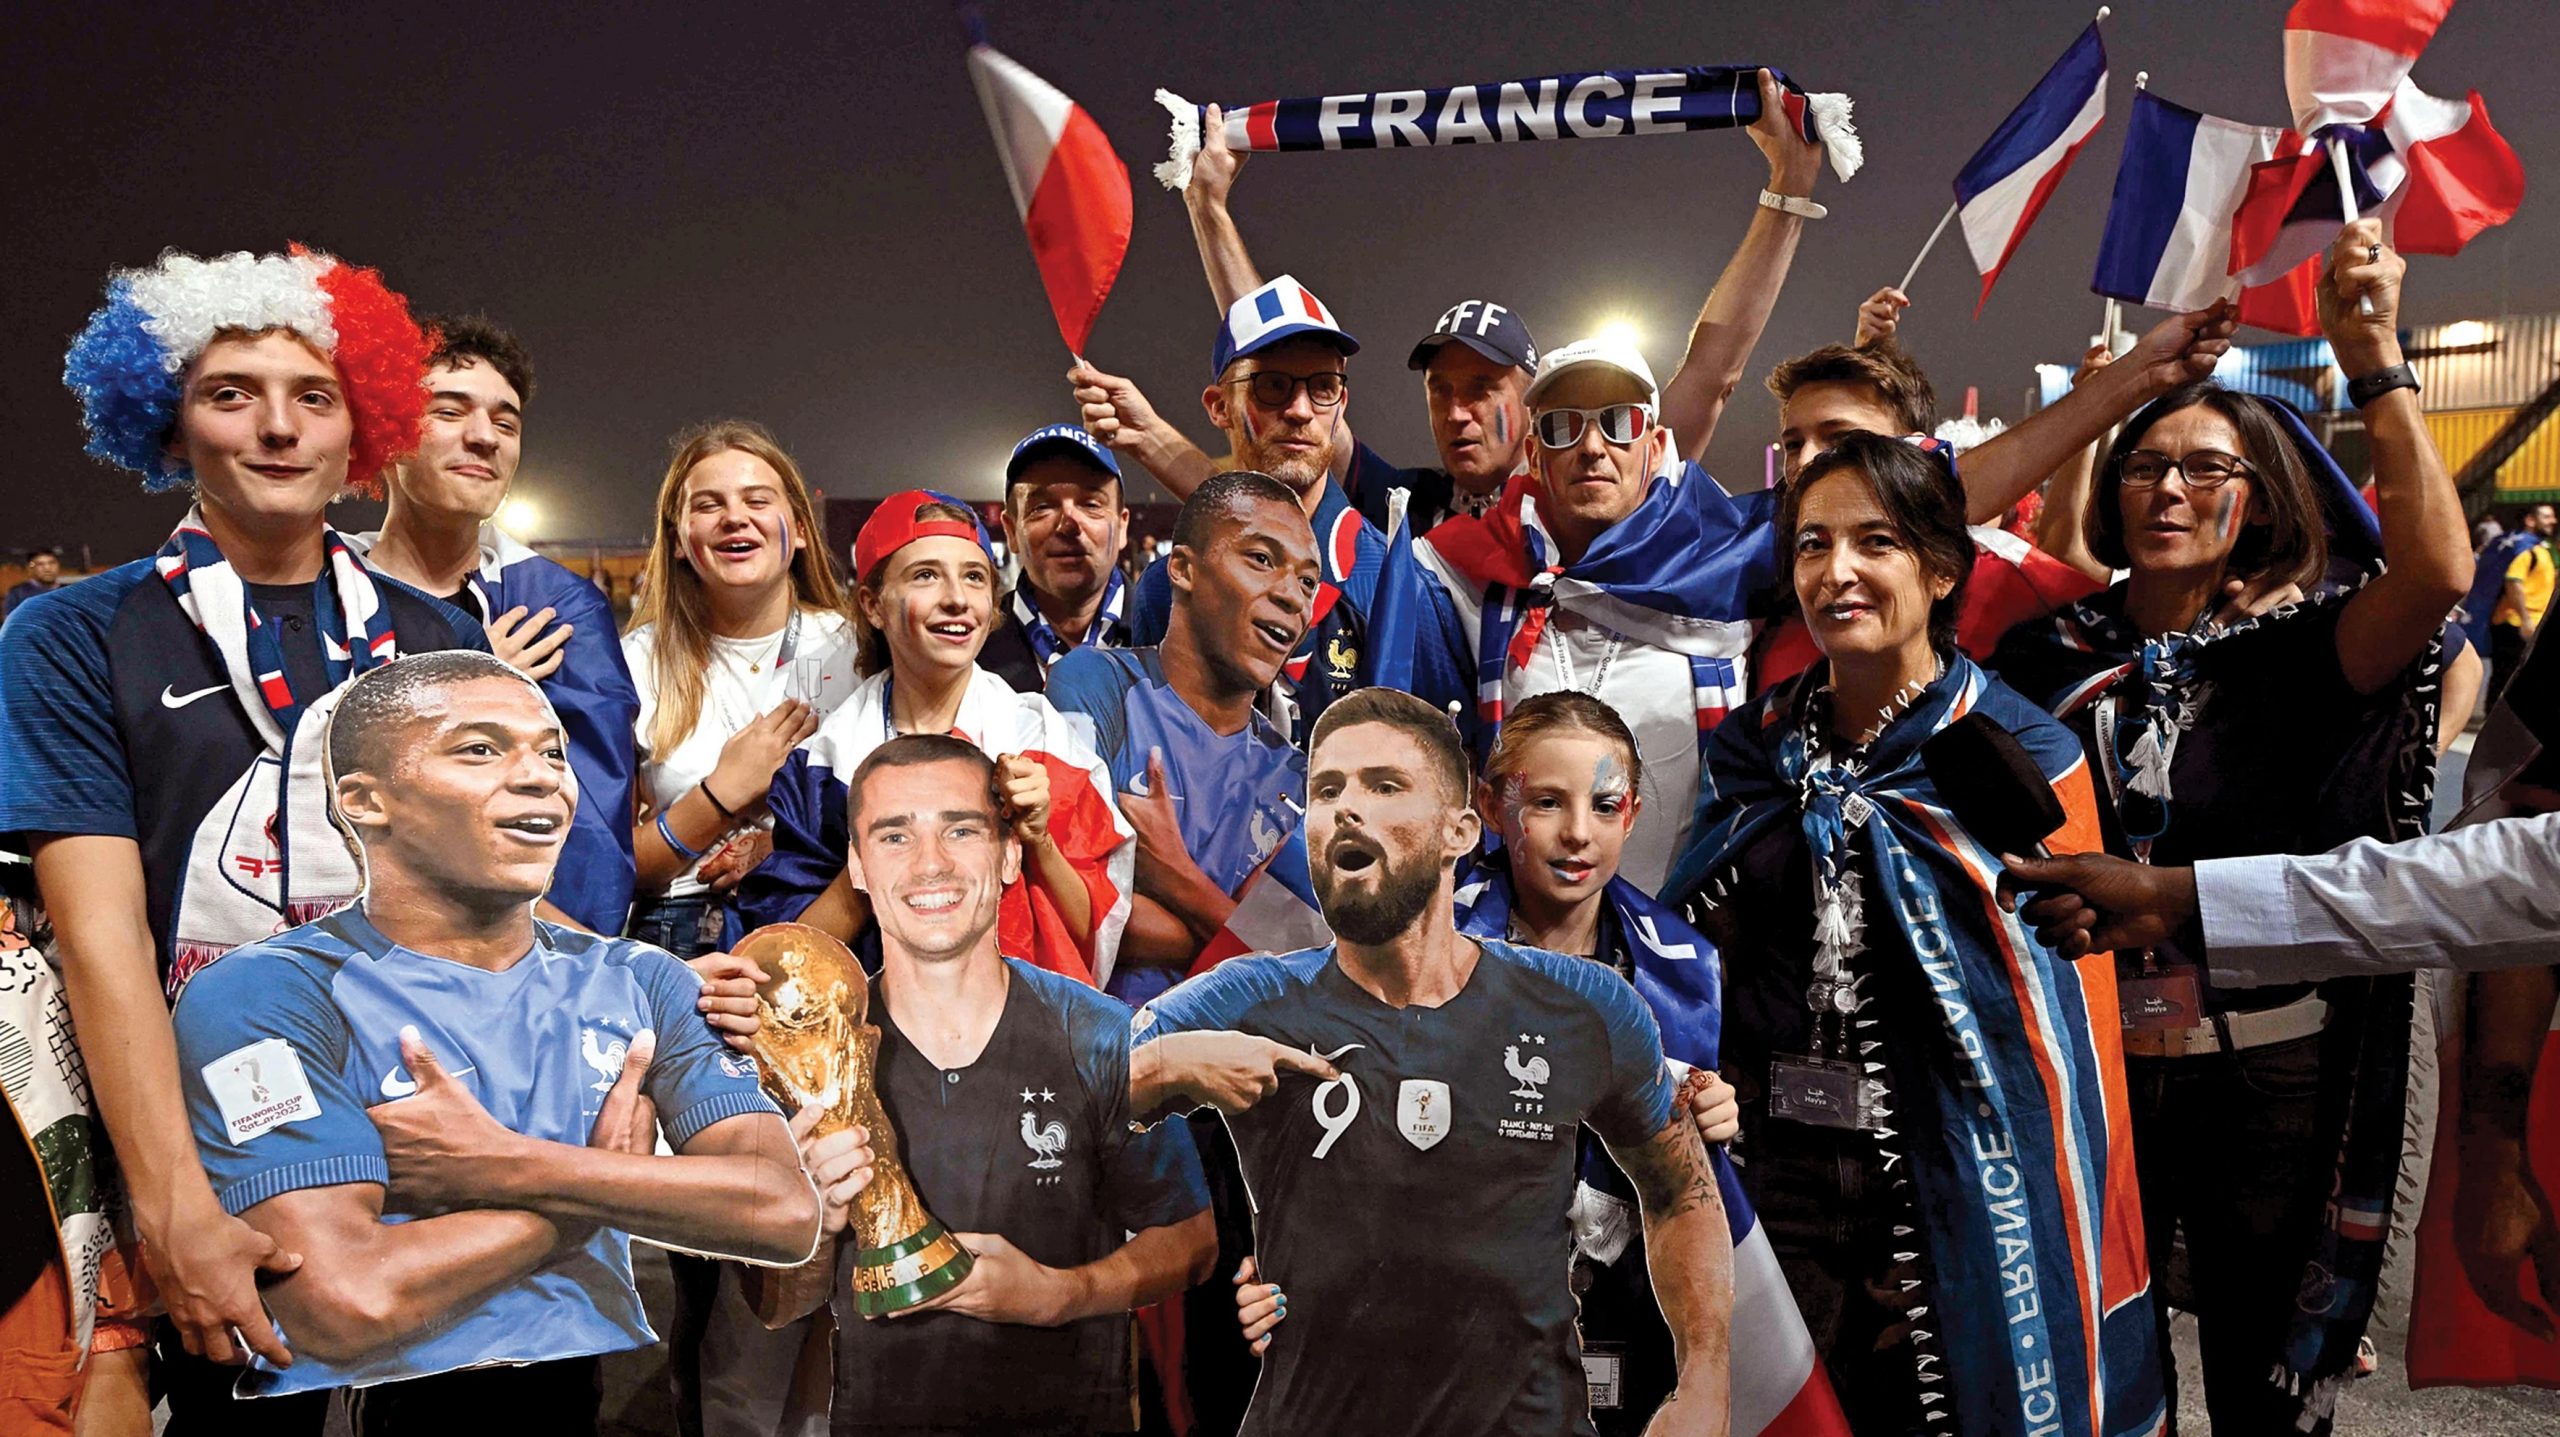 Le Monde Highlights French Fans' Acclaim Over Qatar's Amazing World Cup Hosting